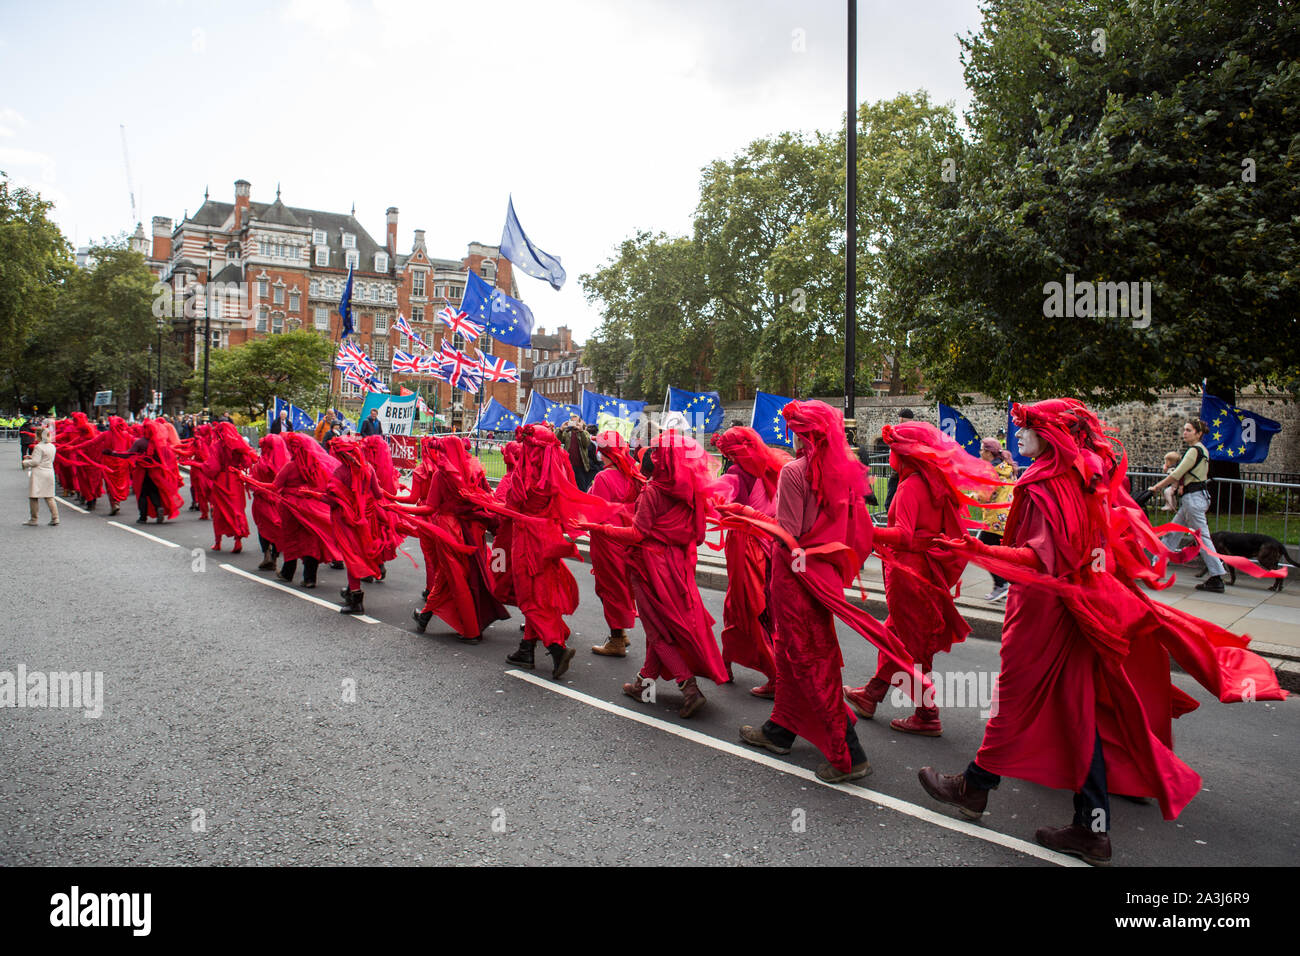 London, UK. 08th Oct, 2019. Environmentalist performance art troupe the 'Red Rebel Brigade' walk silently close to parliament during the environmental protest by Extinction Rebellion activist group.Extinction Rebellion is an international movement that uses non-violent civil disobedience in an attempt to halt mass extinction and minimise the risk of social collapse. The group has blocked a number of key junctions in central London. Credit: SOPA Images Limited/Alamy Live News Stock Photo